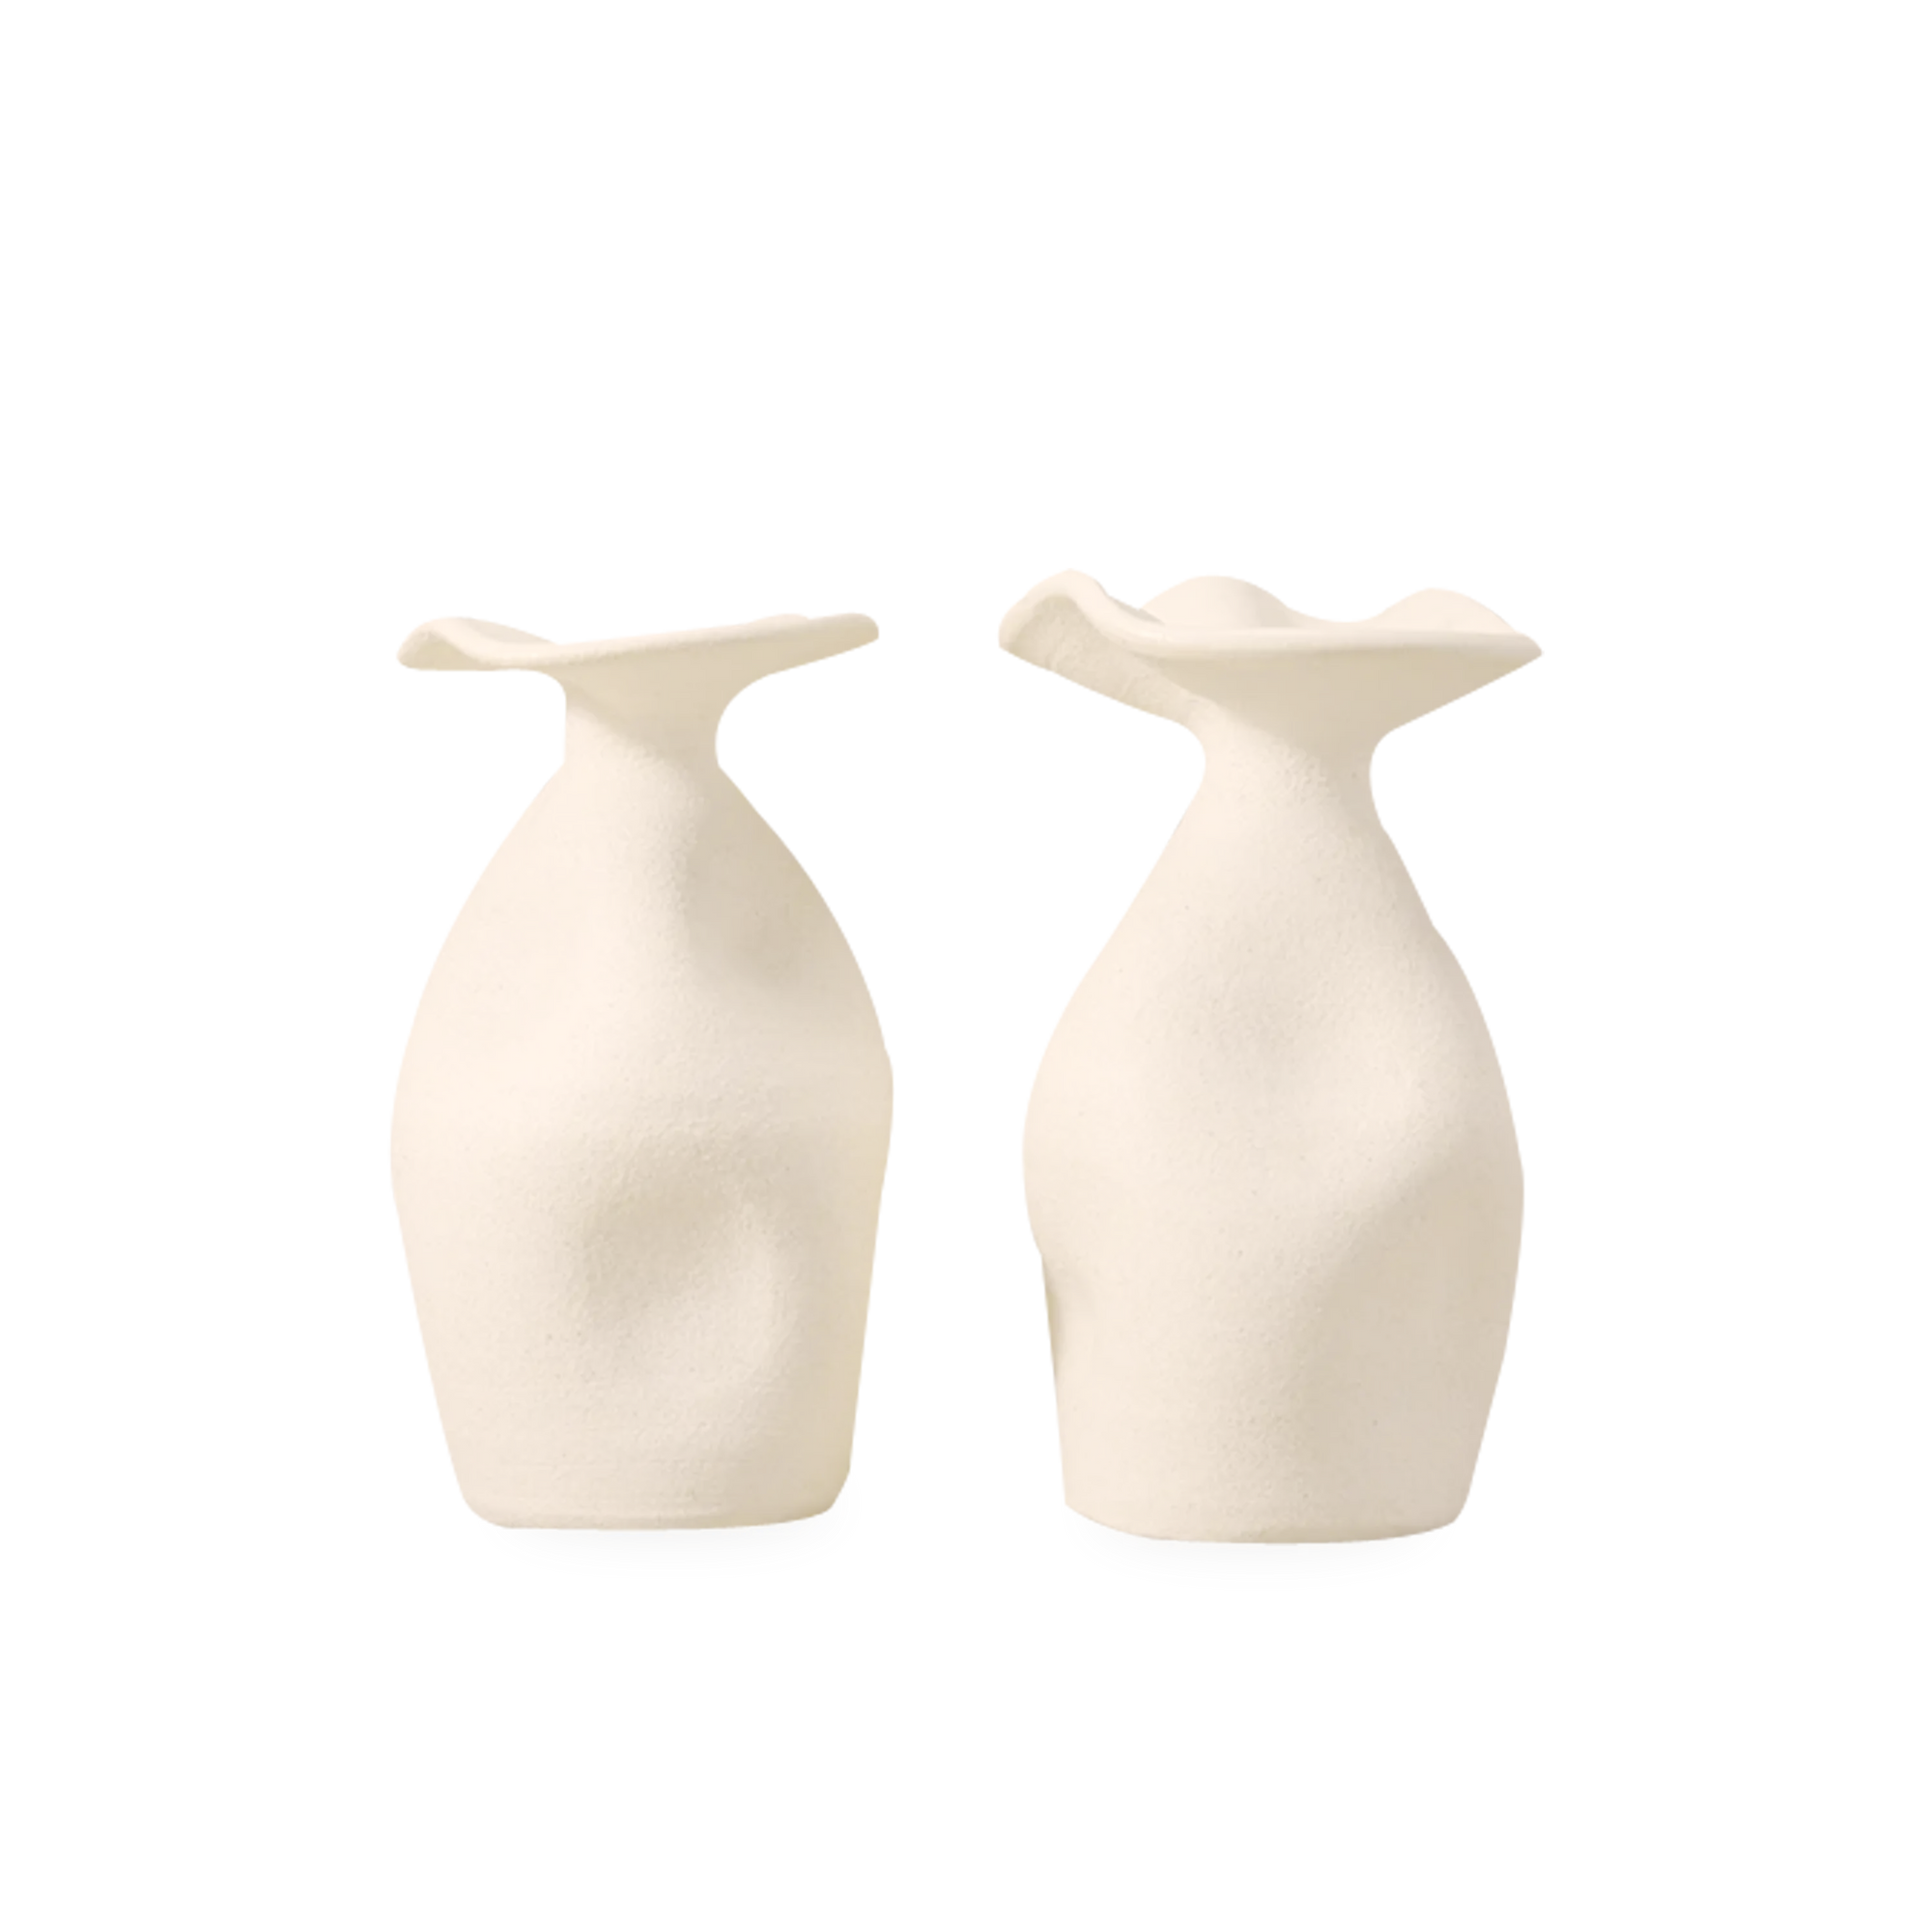 With captivating blooming openings and unique grooves on their bodies, the Helen Candle Holders provide elegant and amicable elements that will enrich your tablescape.